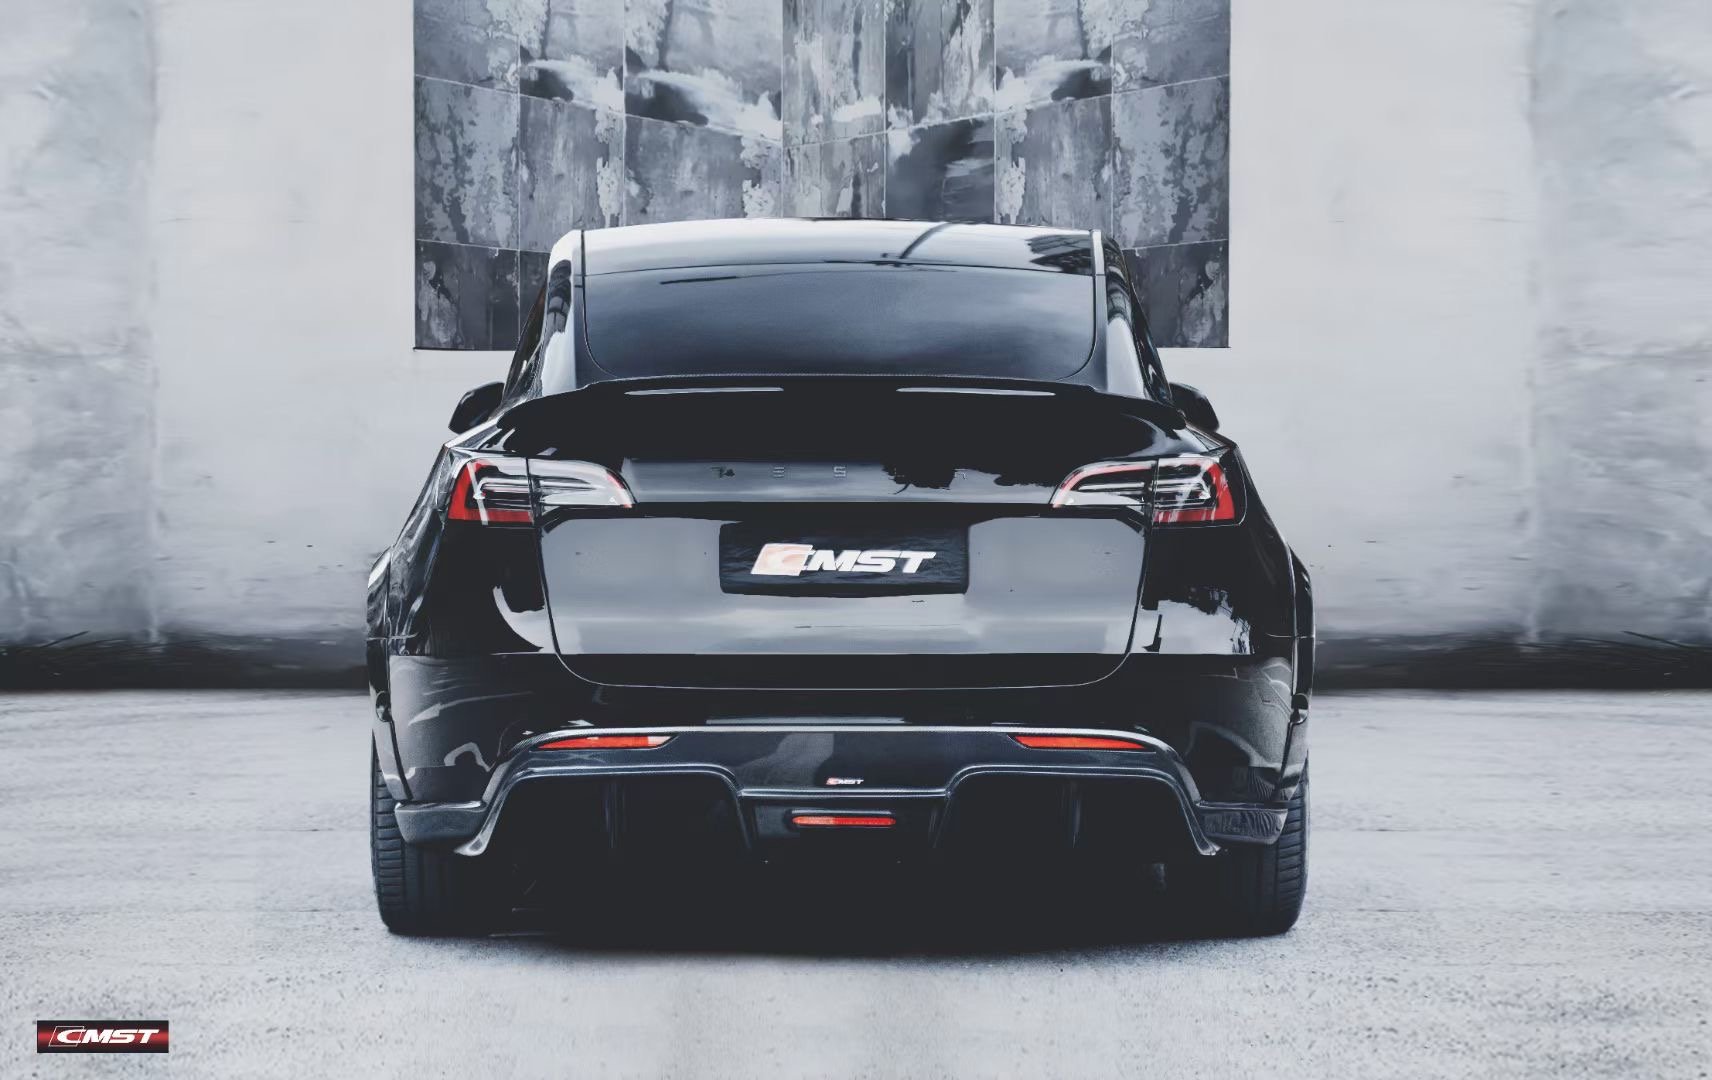 Check our price and buy CMST Carbon Fiber Body Kit set for Tesla Model Y!